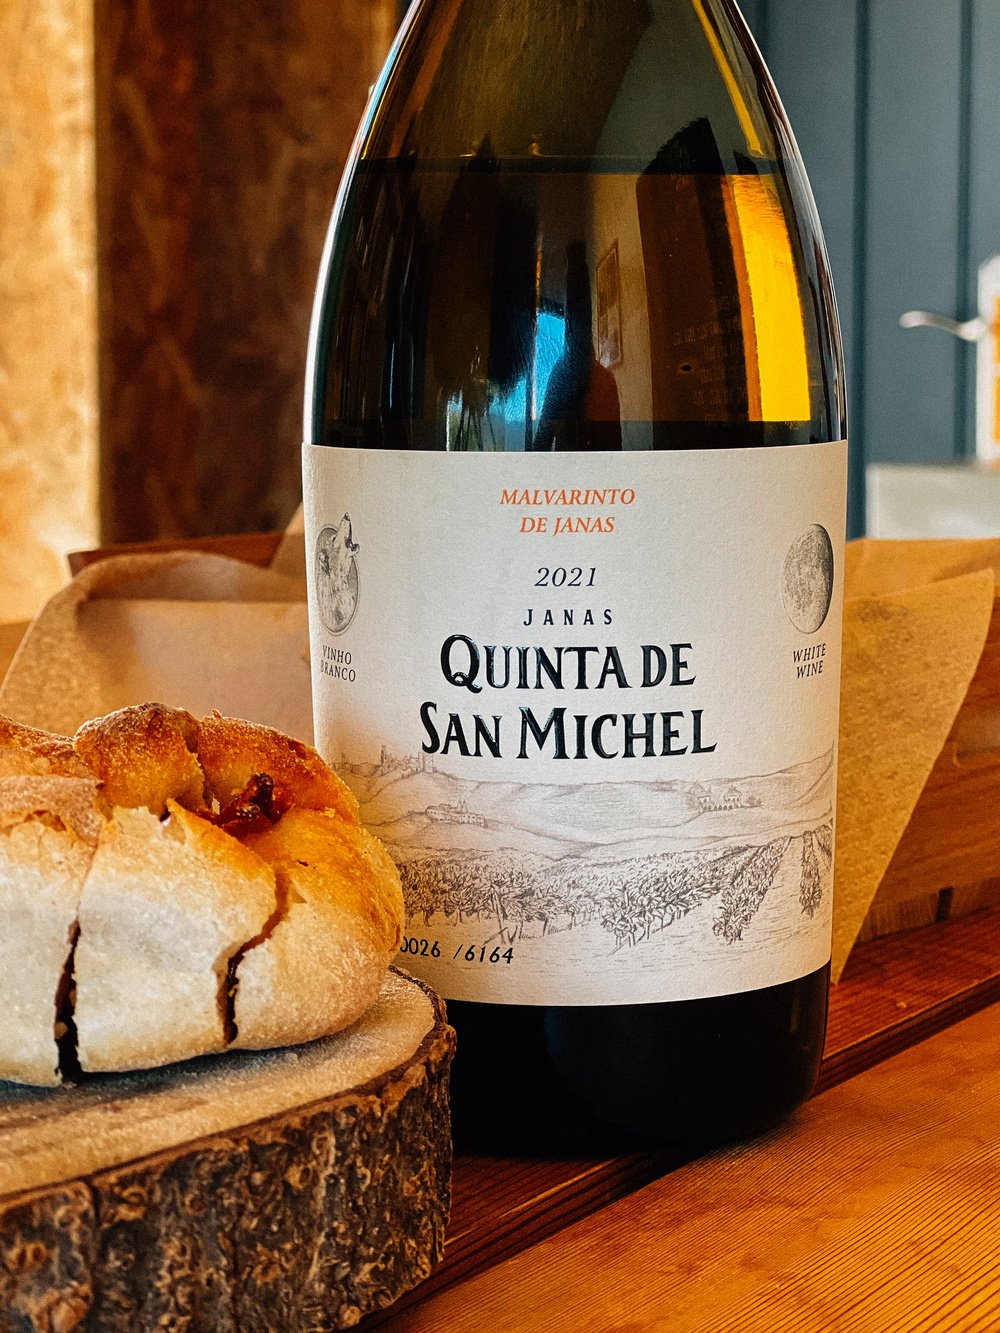 A bottle of white wine labeled “Malvarinto de Janas 2021 Quinta de San Michel” next to a round loaf of bread on a wooden table.